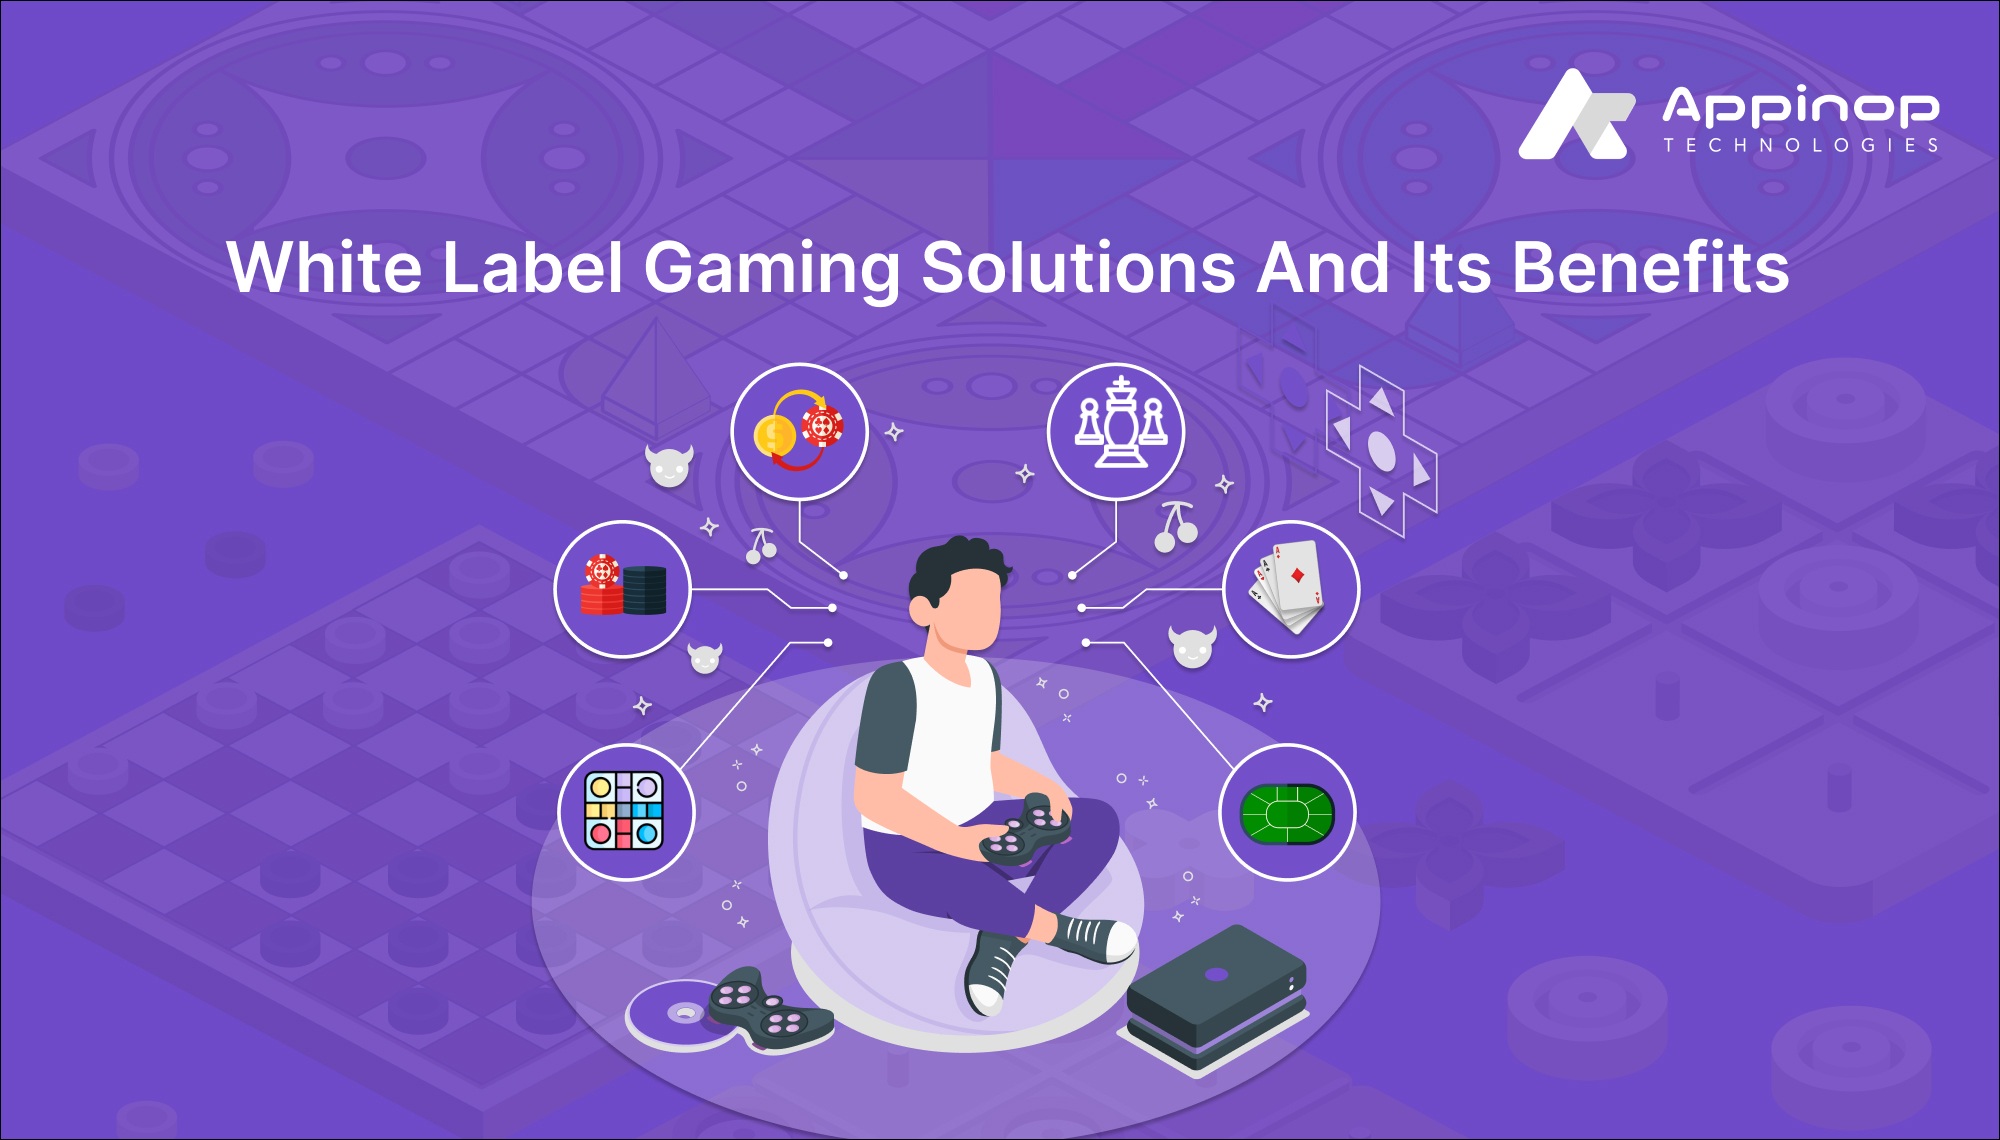 White Label Gaming Solutions